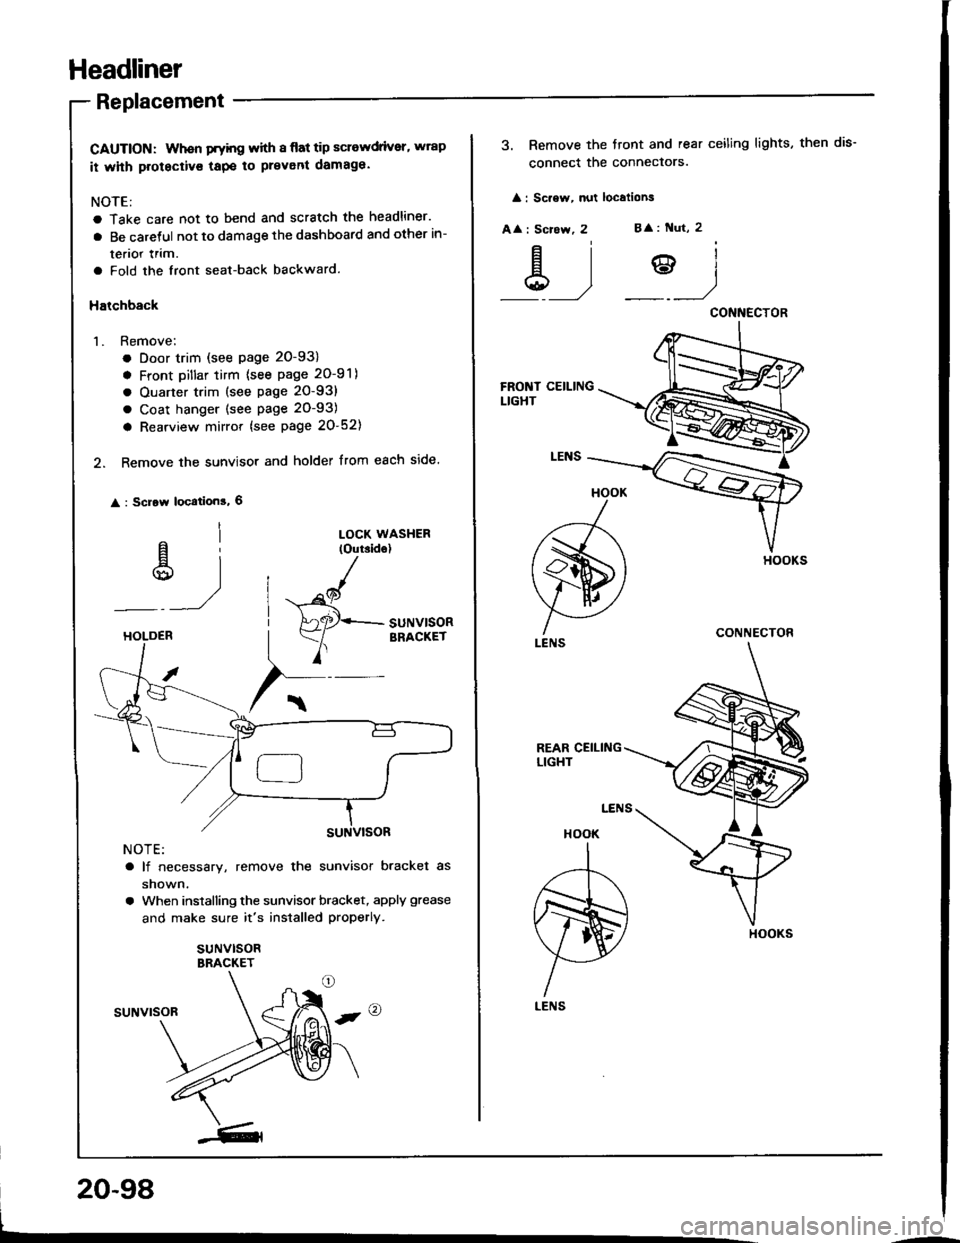 ACURA INTEGRA 1994  Service Repair Manual Headliner
Replacement
CAUTION: Whon Fyhg with I flat tip sclewdrivsr, wrap
it whh protectivs tapo to prevent damaga.
NOTE:
a Take care not to bend and scratch the headliner.
a Be caretul not to damage